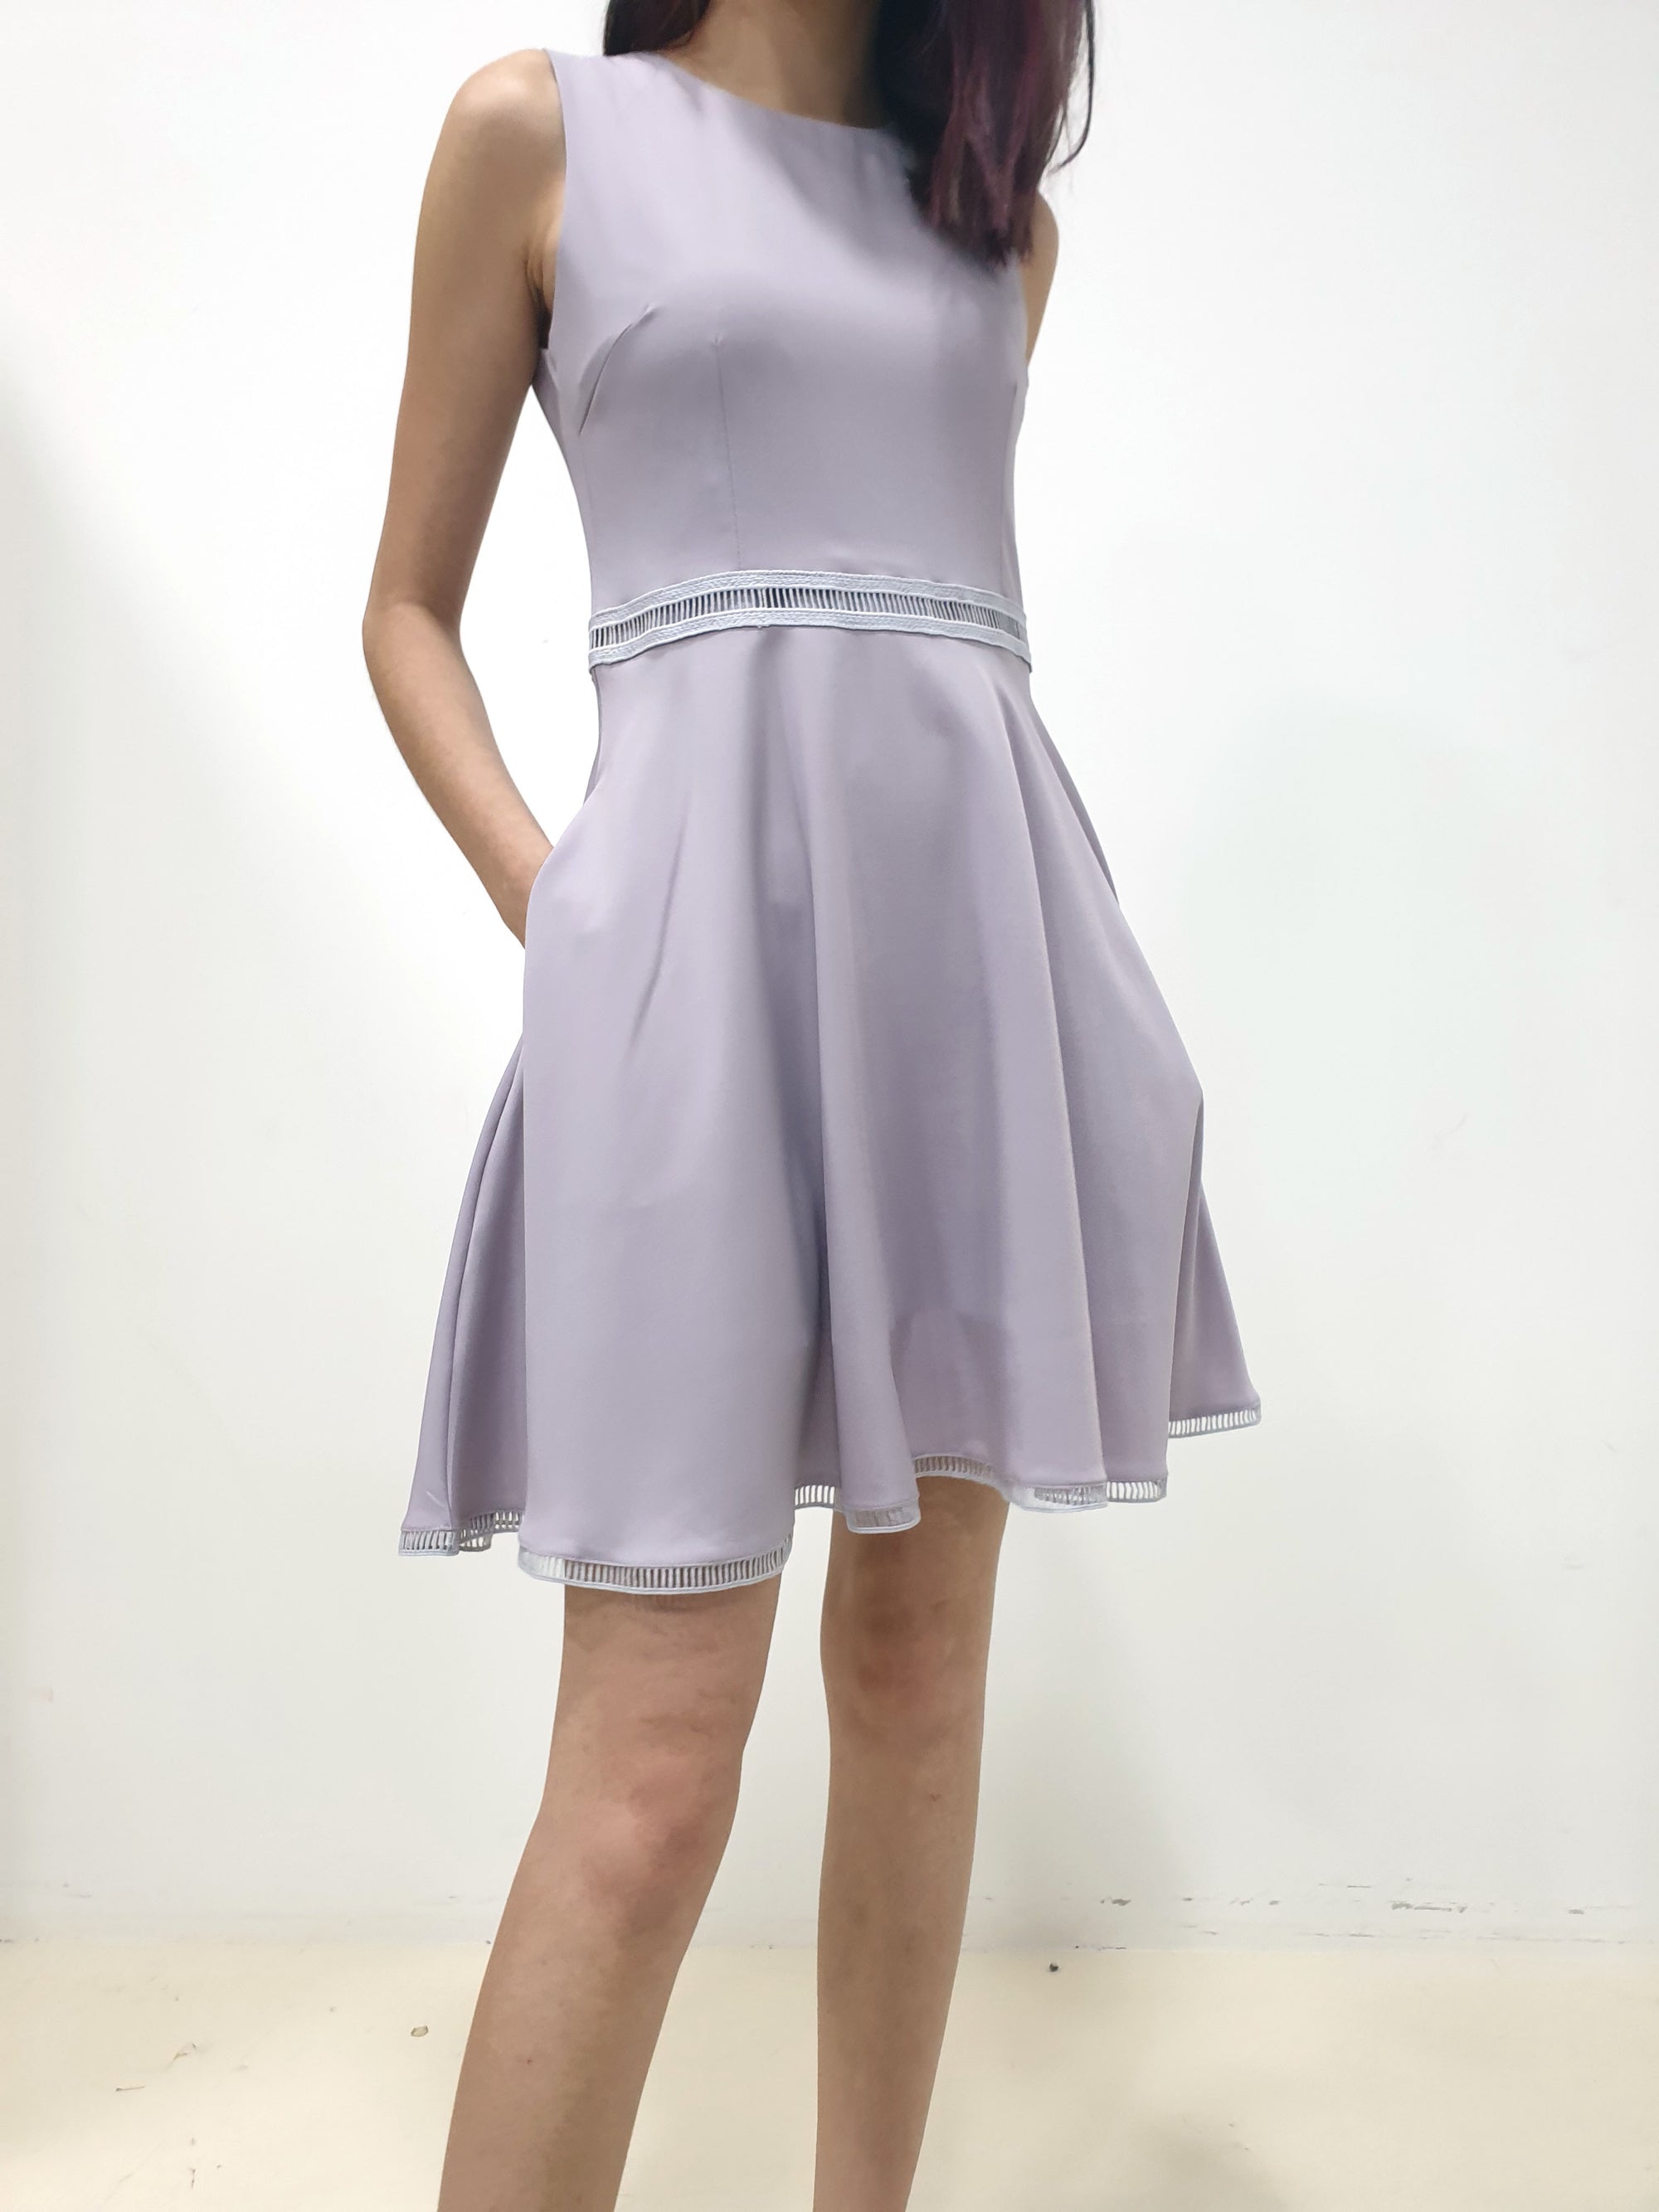 Ladder Lace Dress - Lilac Grey (Non-returnable) - Ferlicious